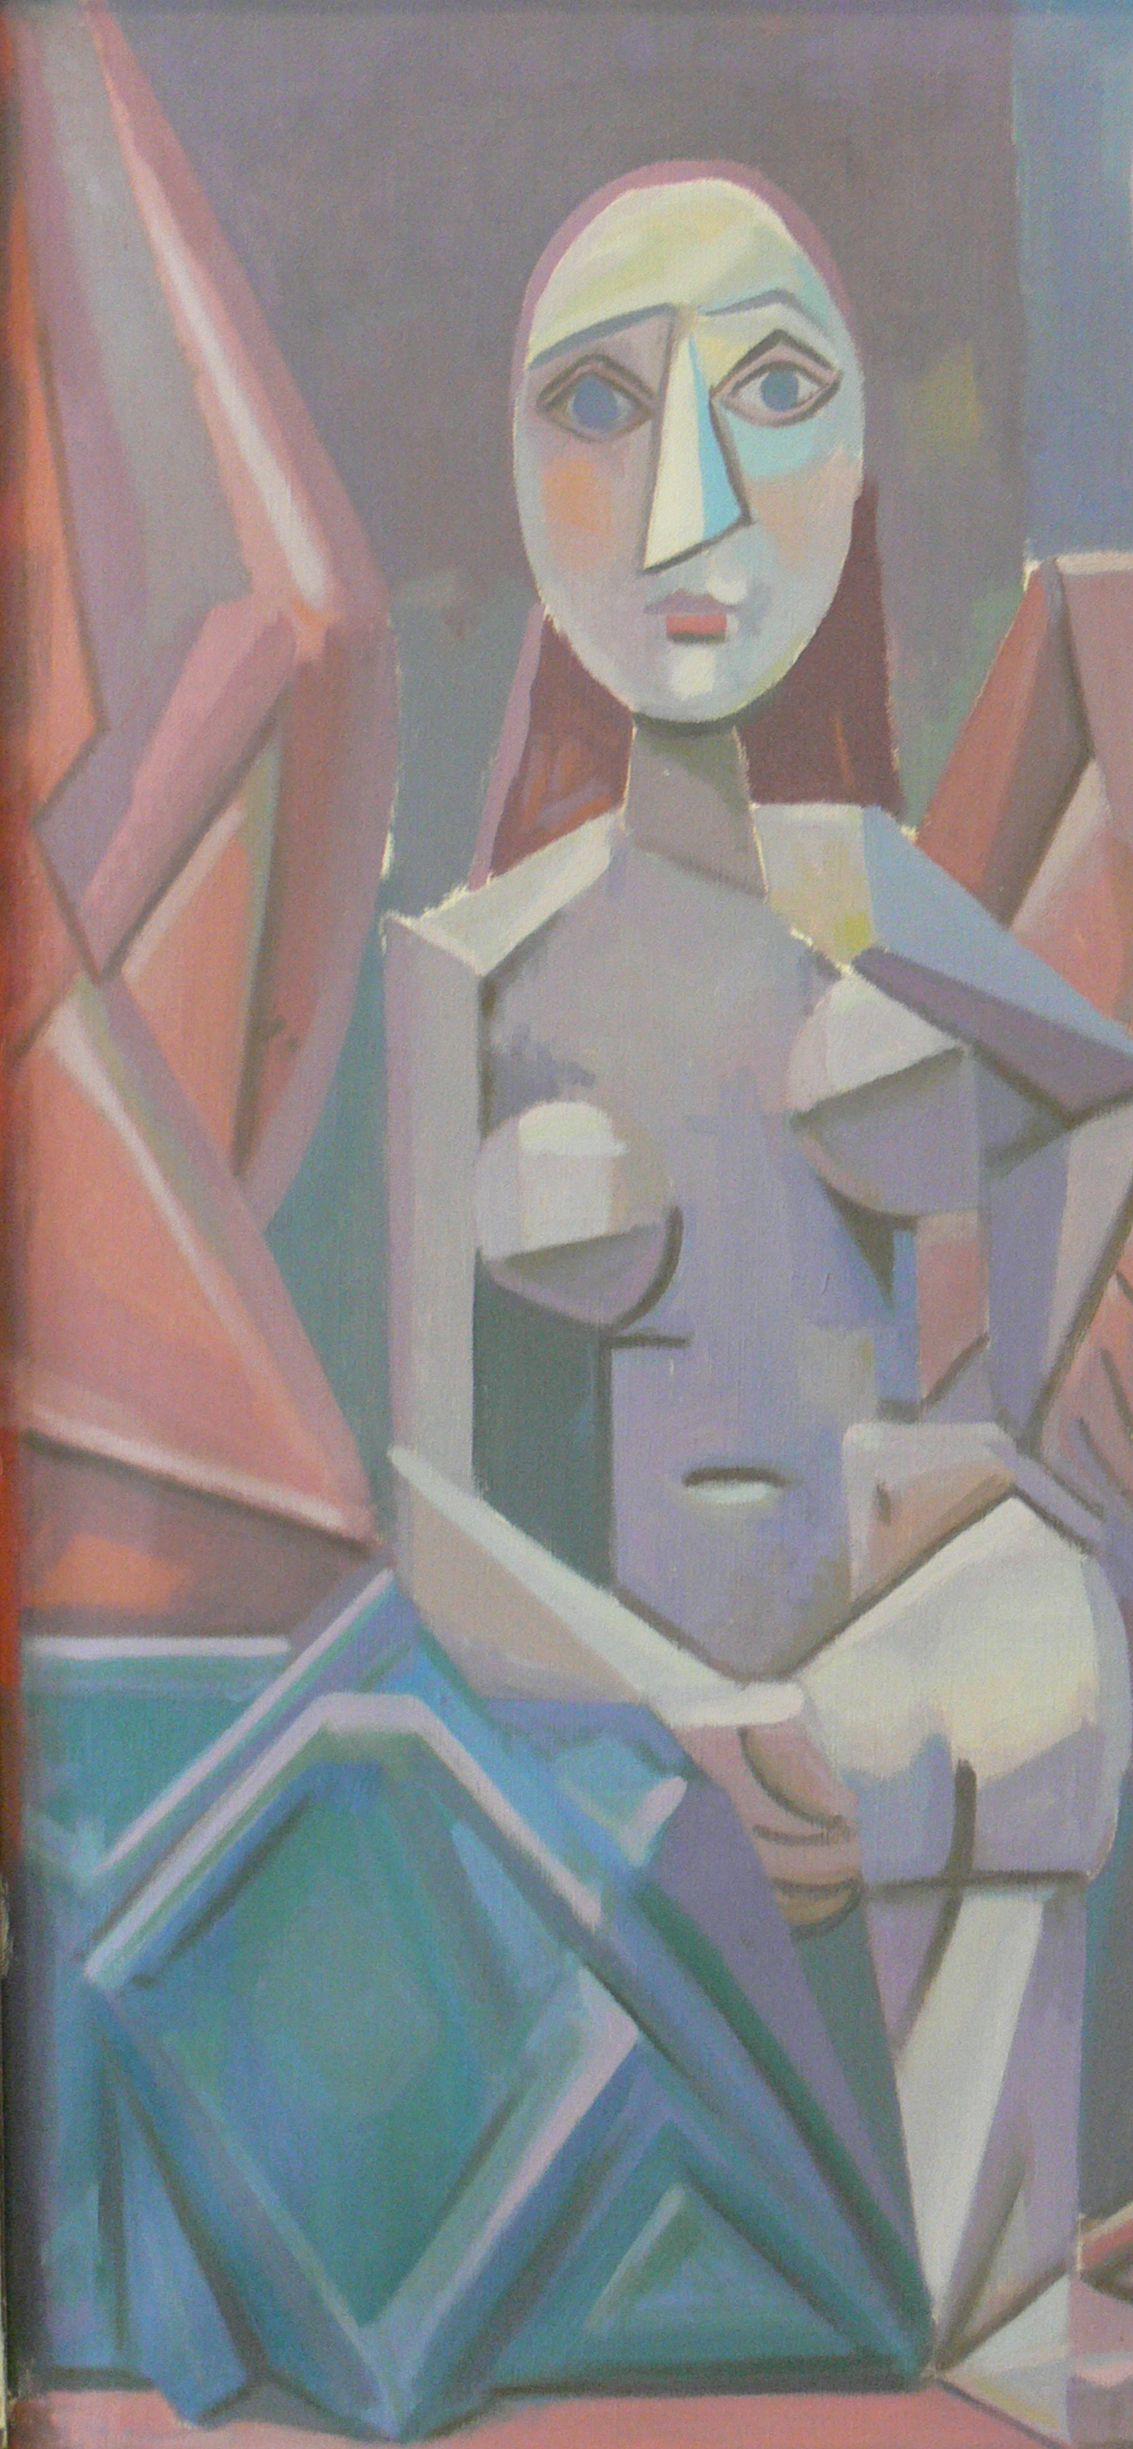 Oil painting on canvas, circa 1948 by Werner Reifahrt ( 1919-1977 ), Germany. Signed on the back. Framed.
Measurements: 37.4 x 30.71 in ( 95 x 78 cm )

Werner Reifarth ( 1919 - 1970 ) worked mainly in the GDR. His works can be found among others in